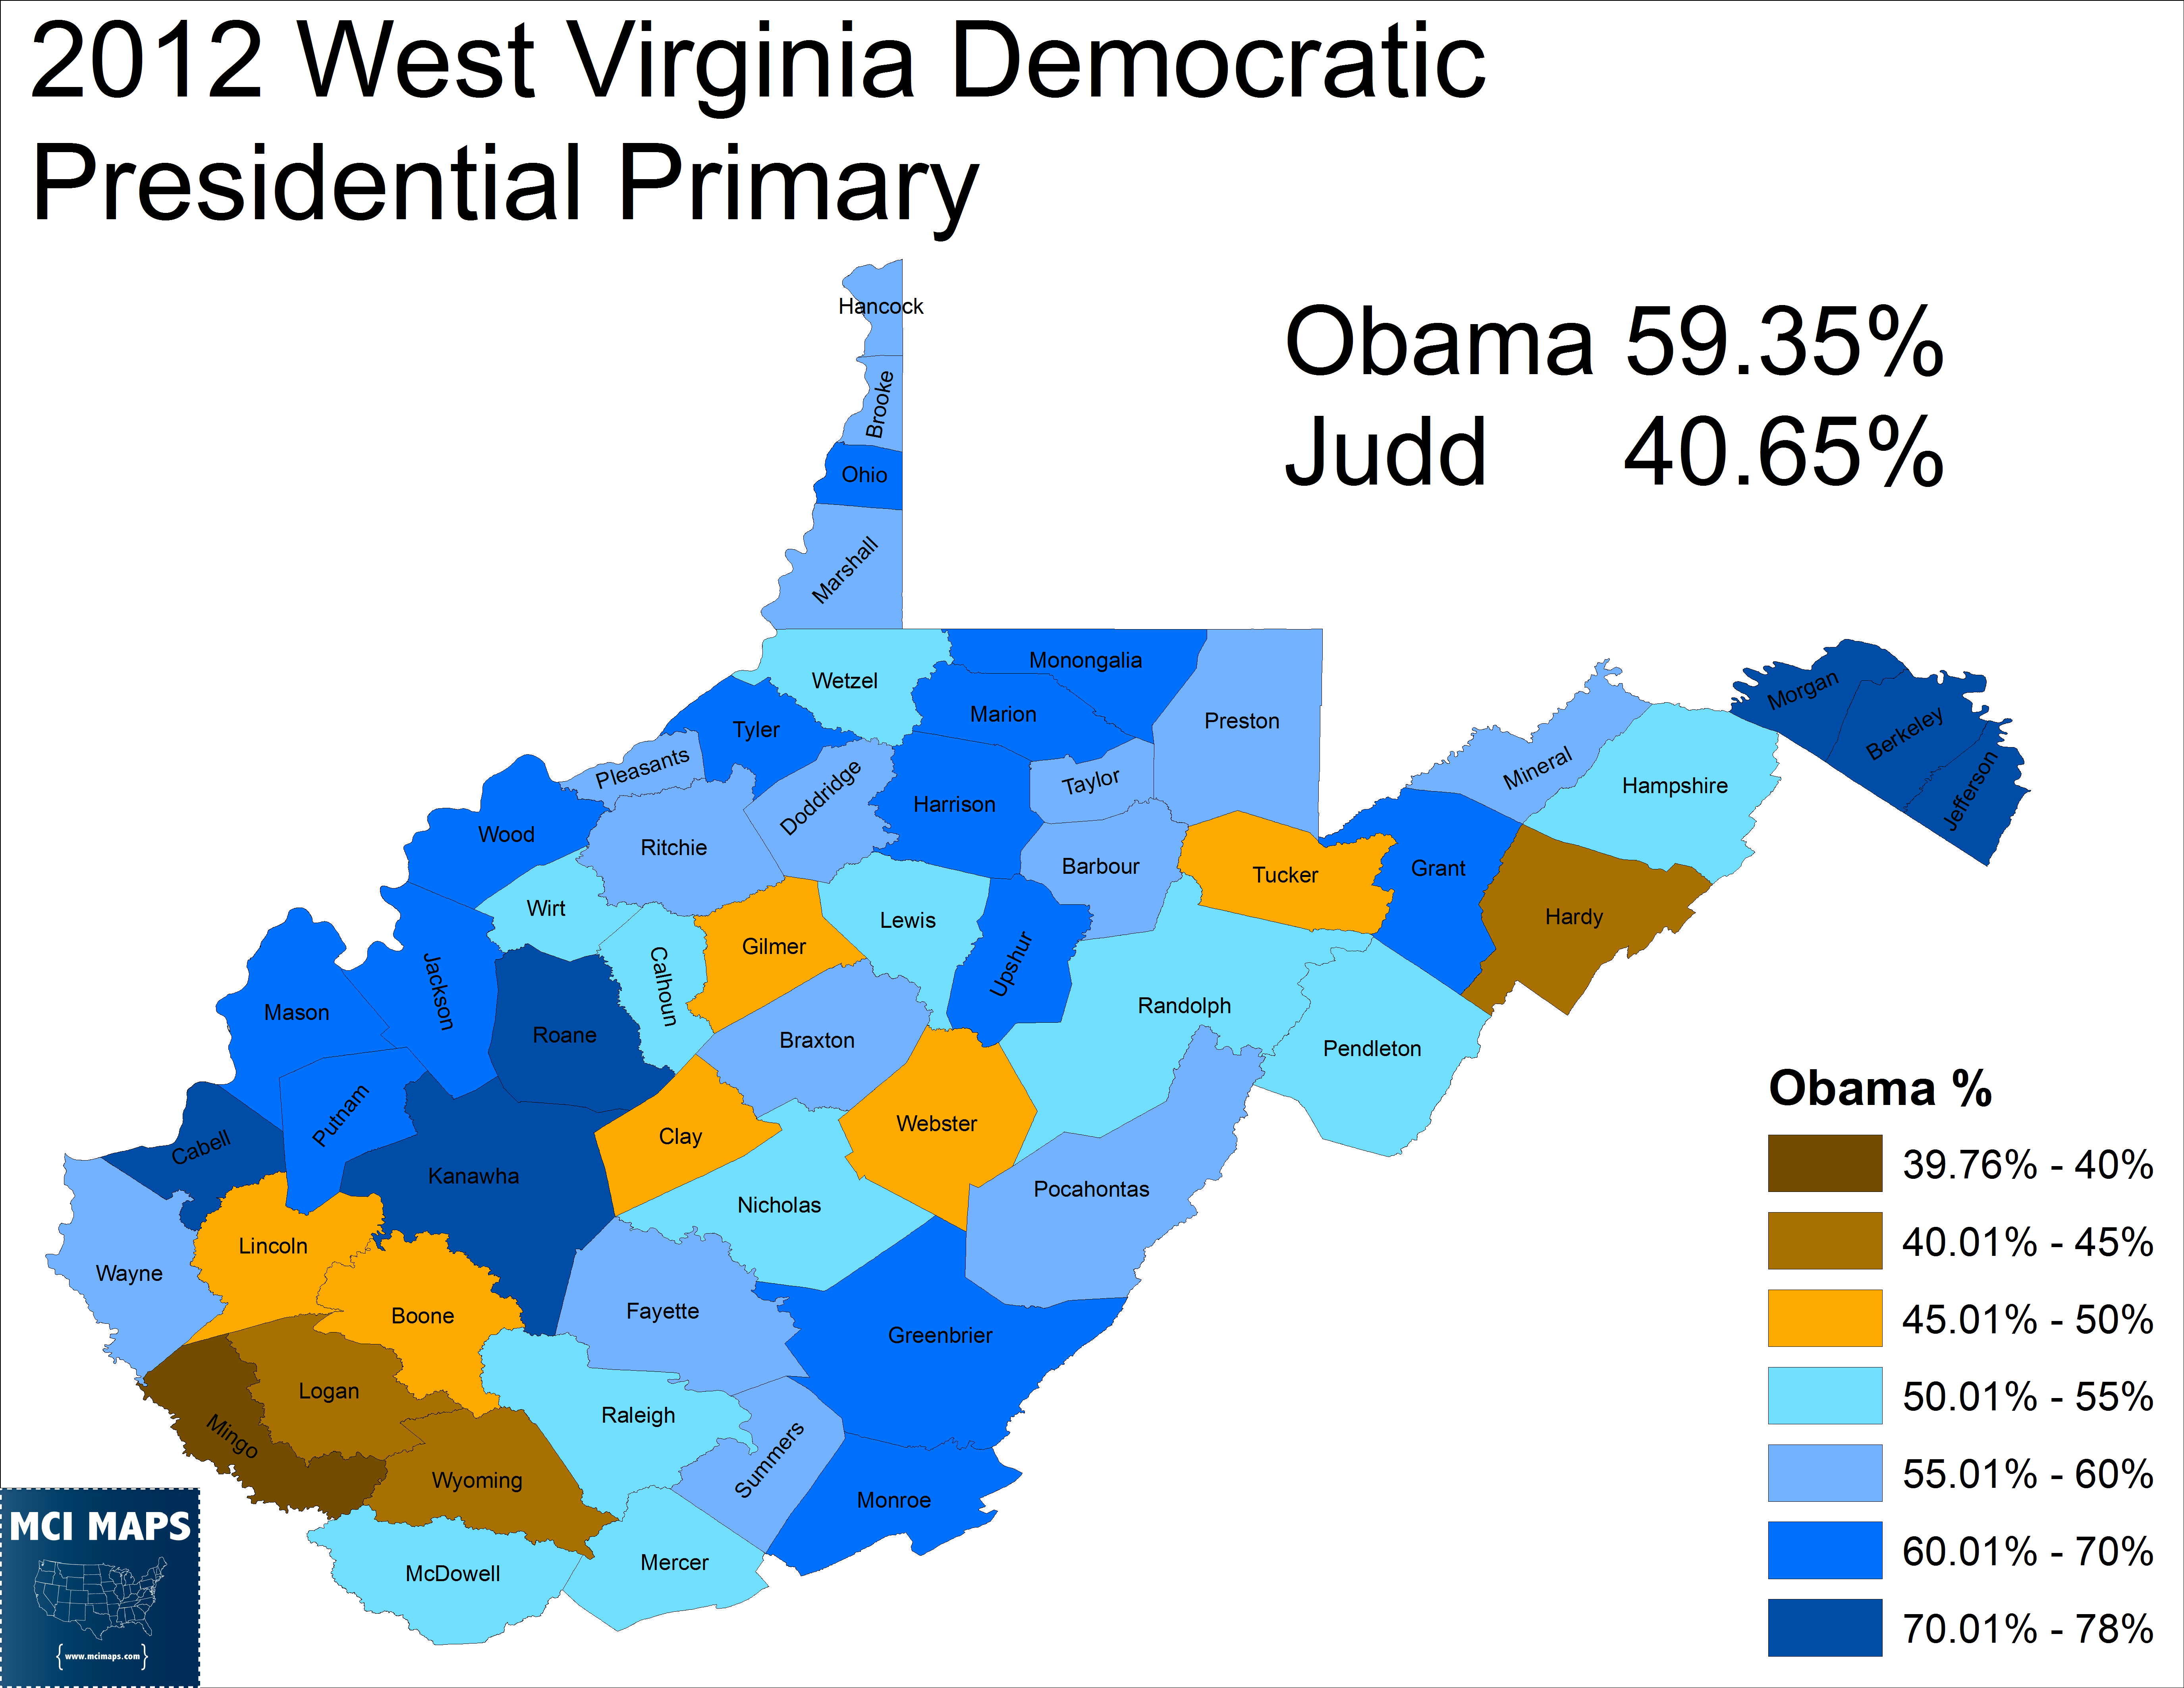 West Virginia Democratic Primary Poised to have high protest vote MCI